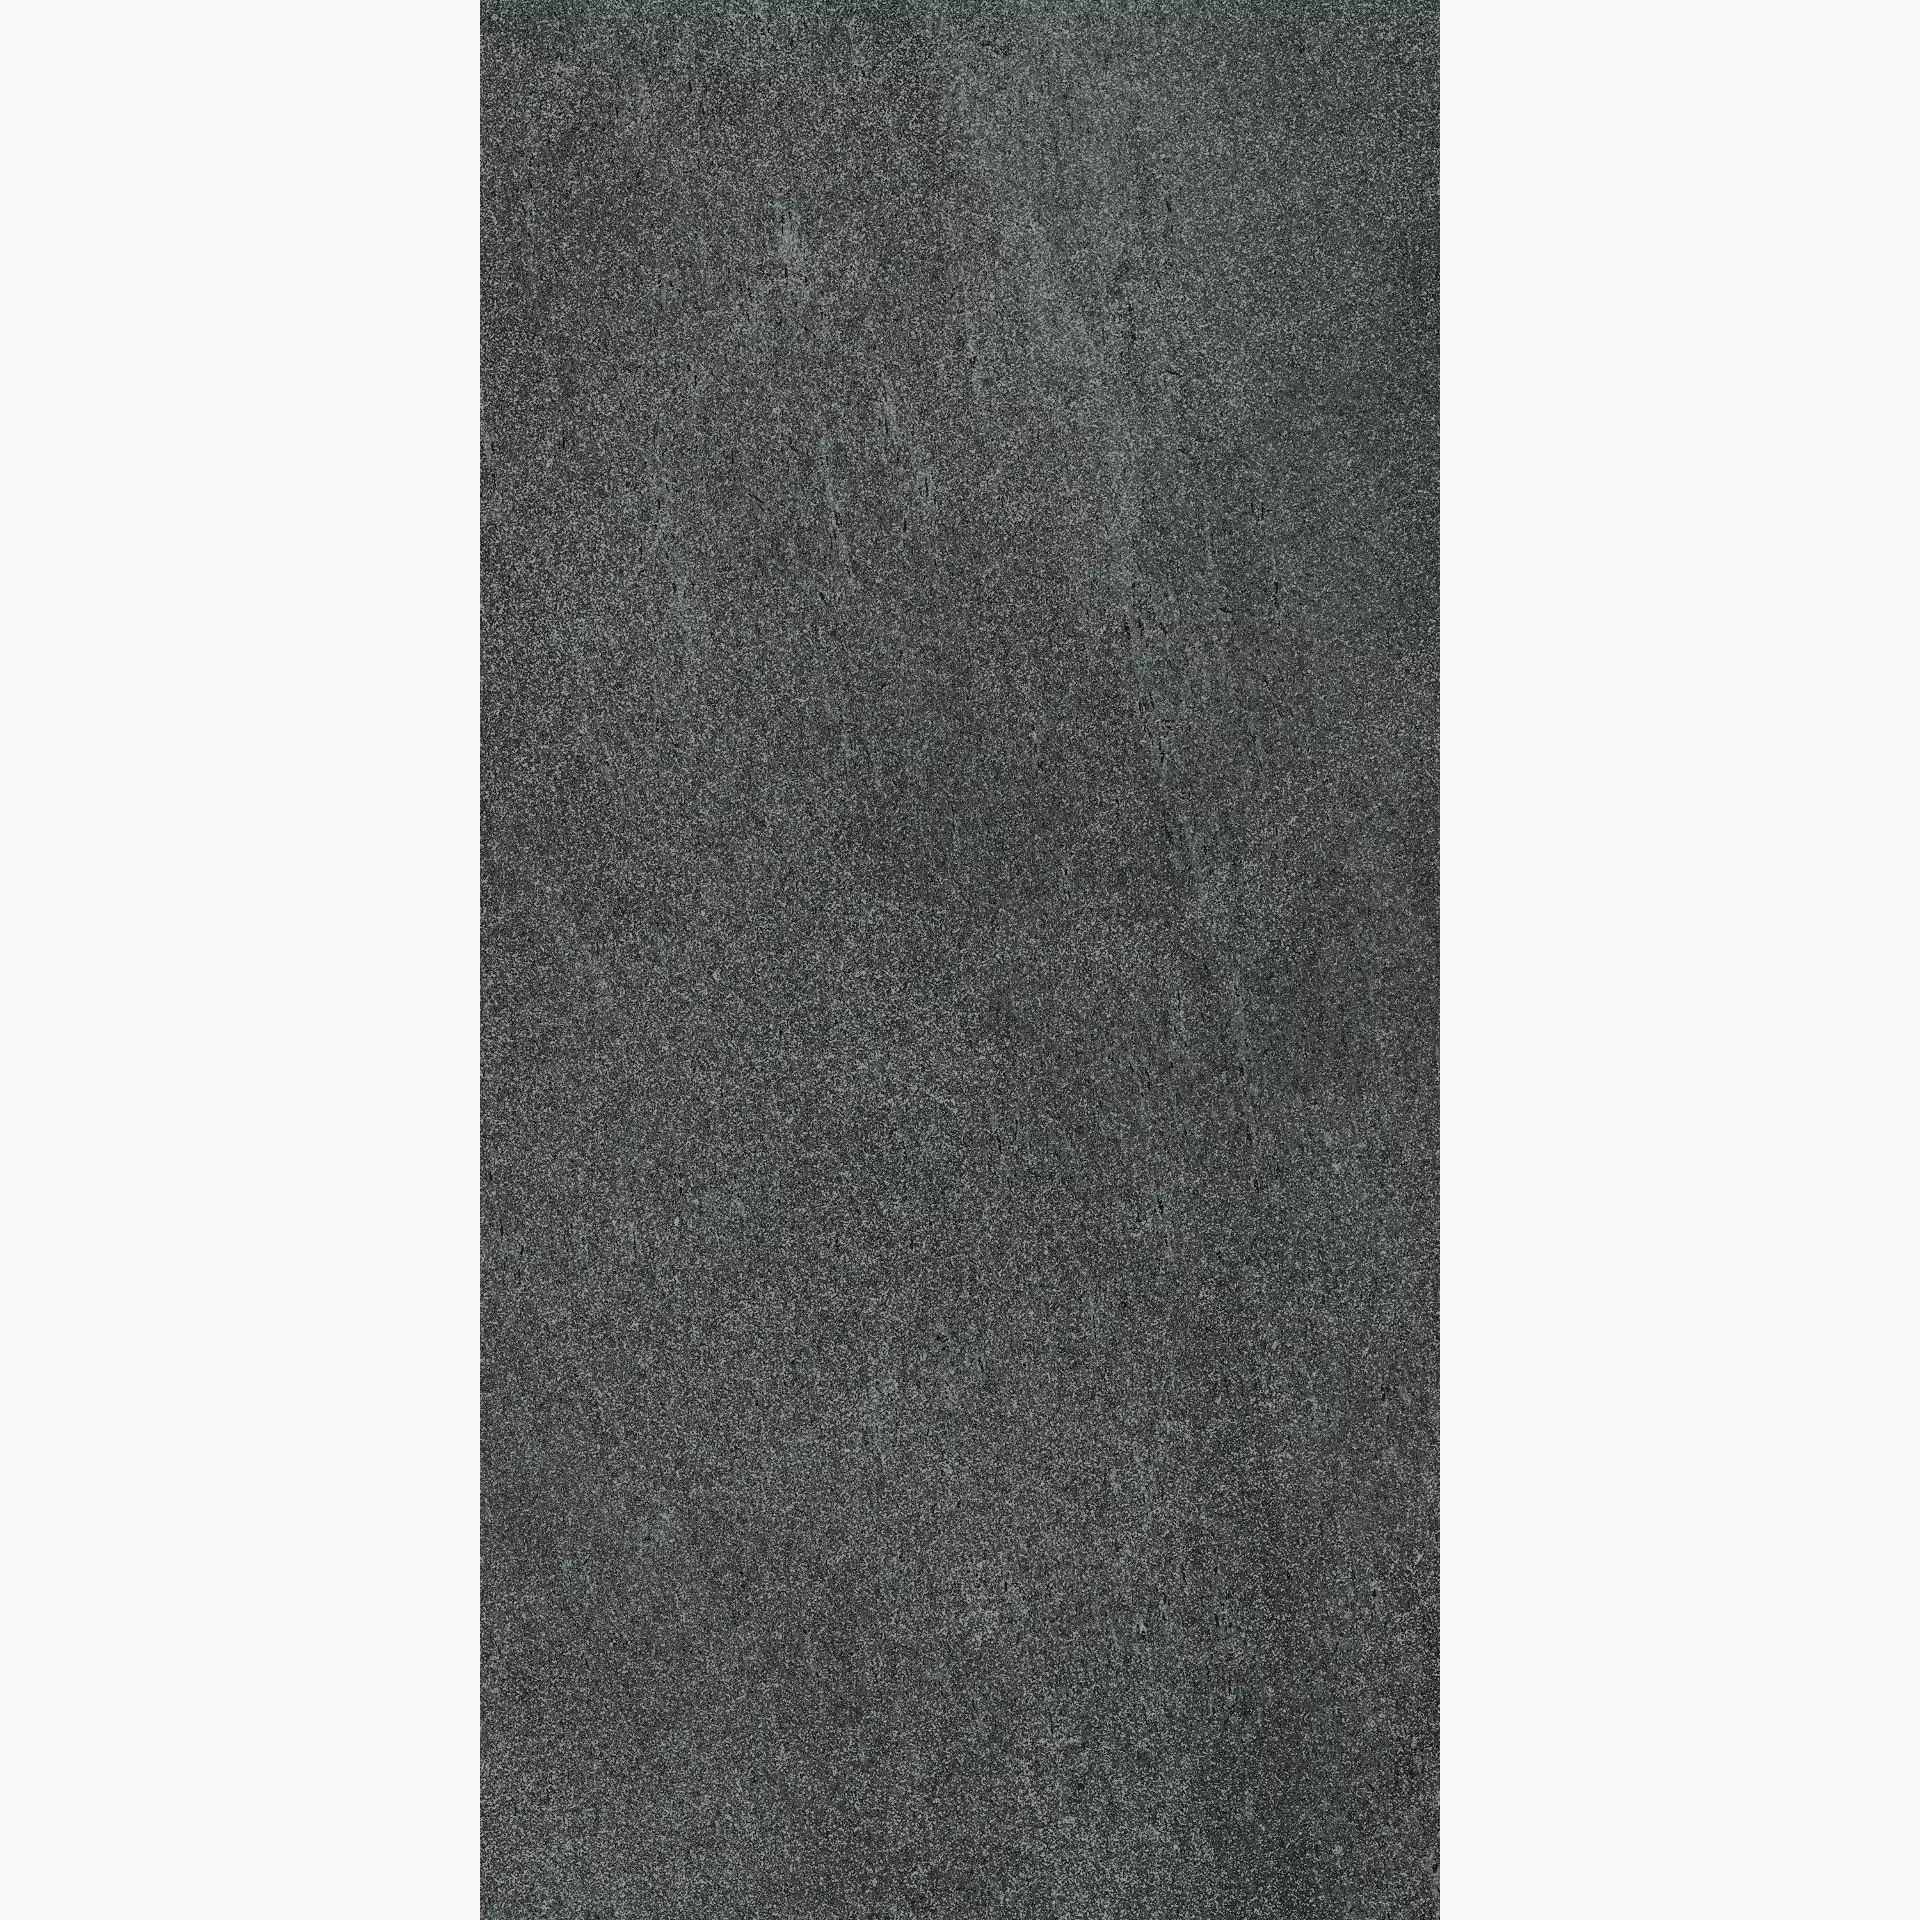 Cottodeste Blend Stone Deep Hammered Protect EGXBS60 60x120cm rectified 20mm